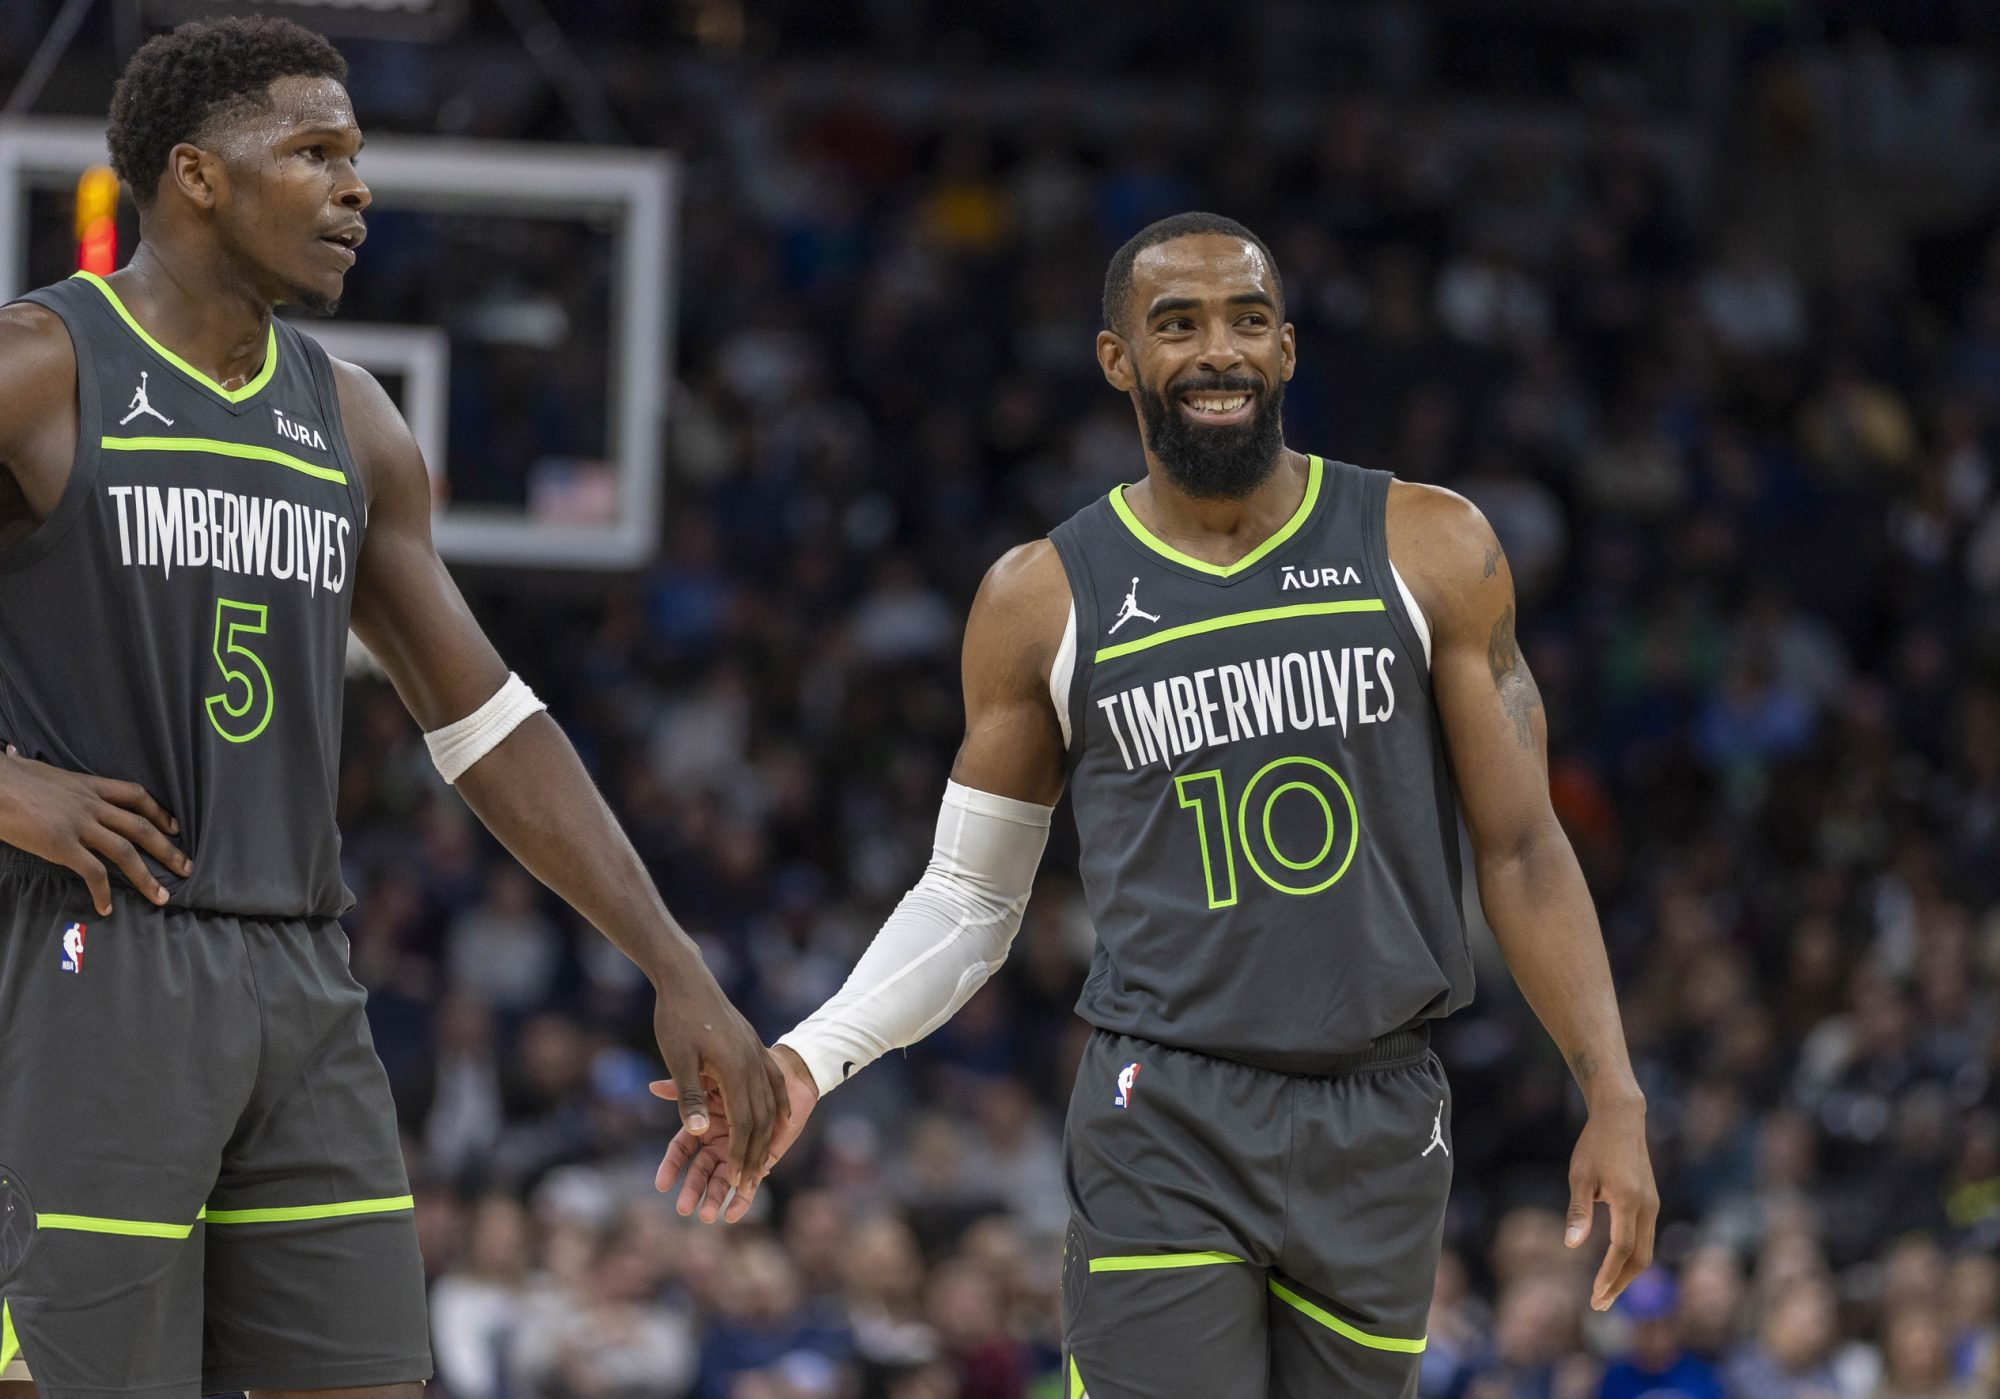 The Timberwolves' Dynamic Duo Gobert and Towns Reshape Team's Destiny